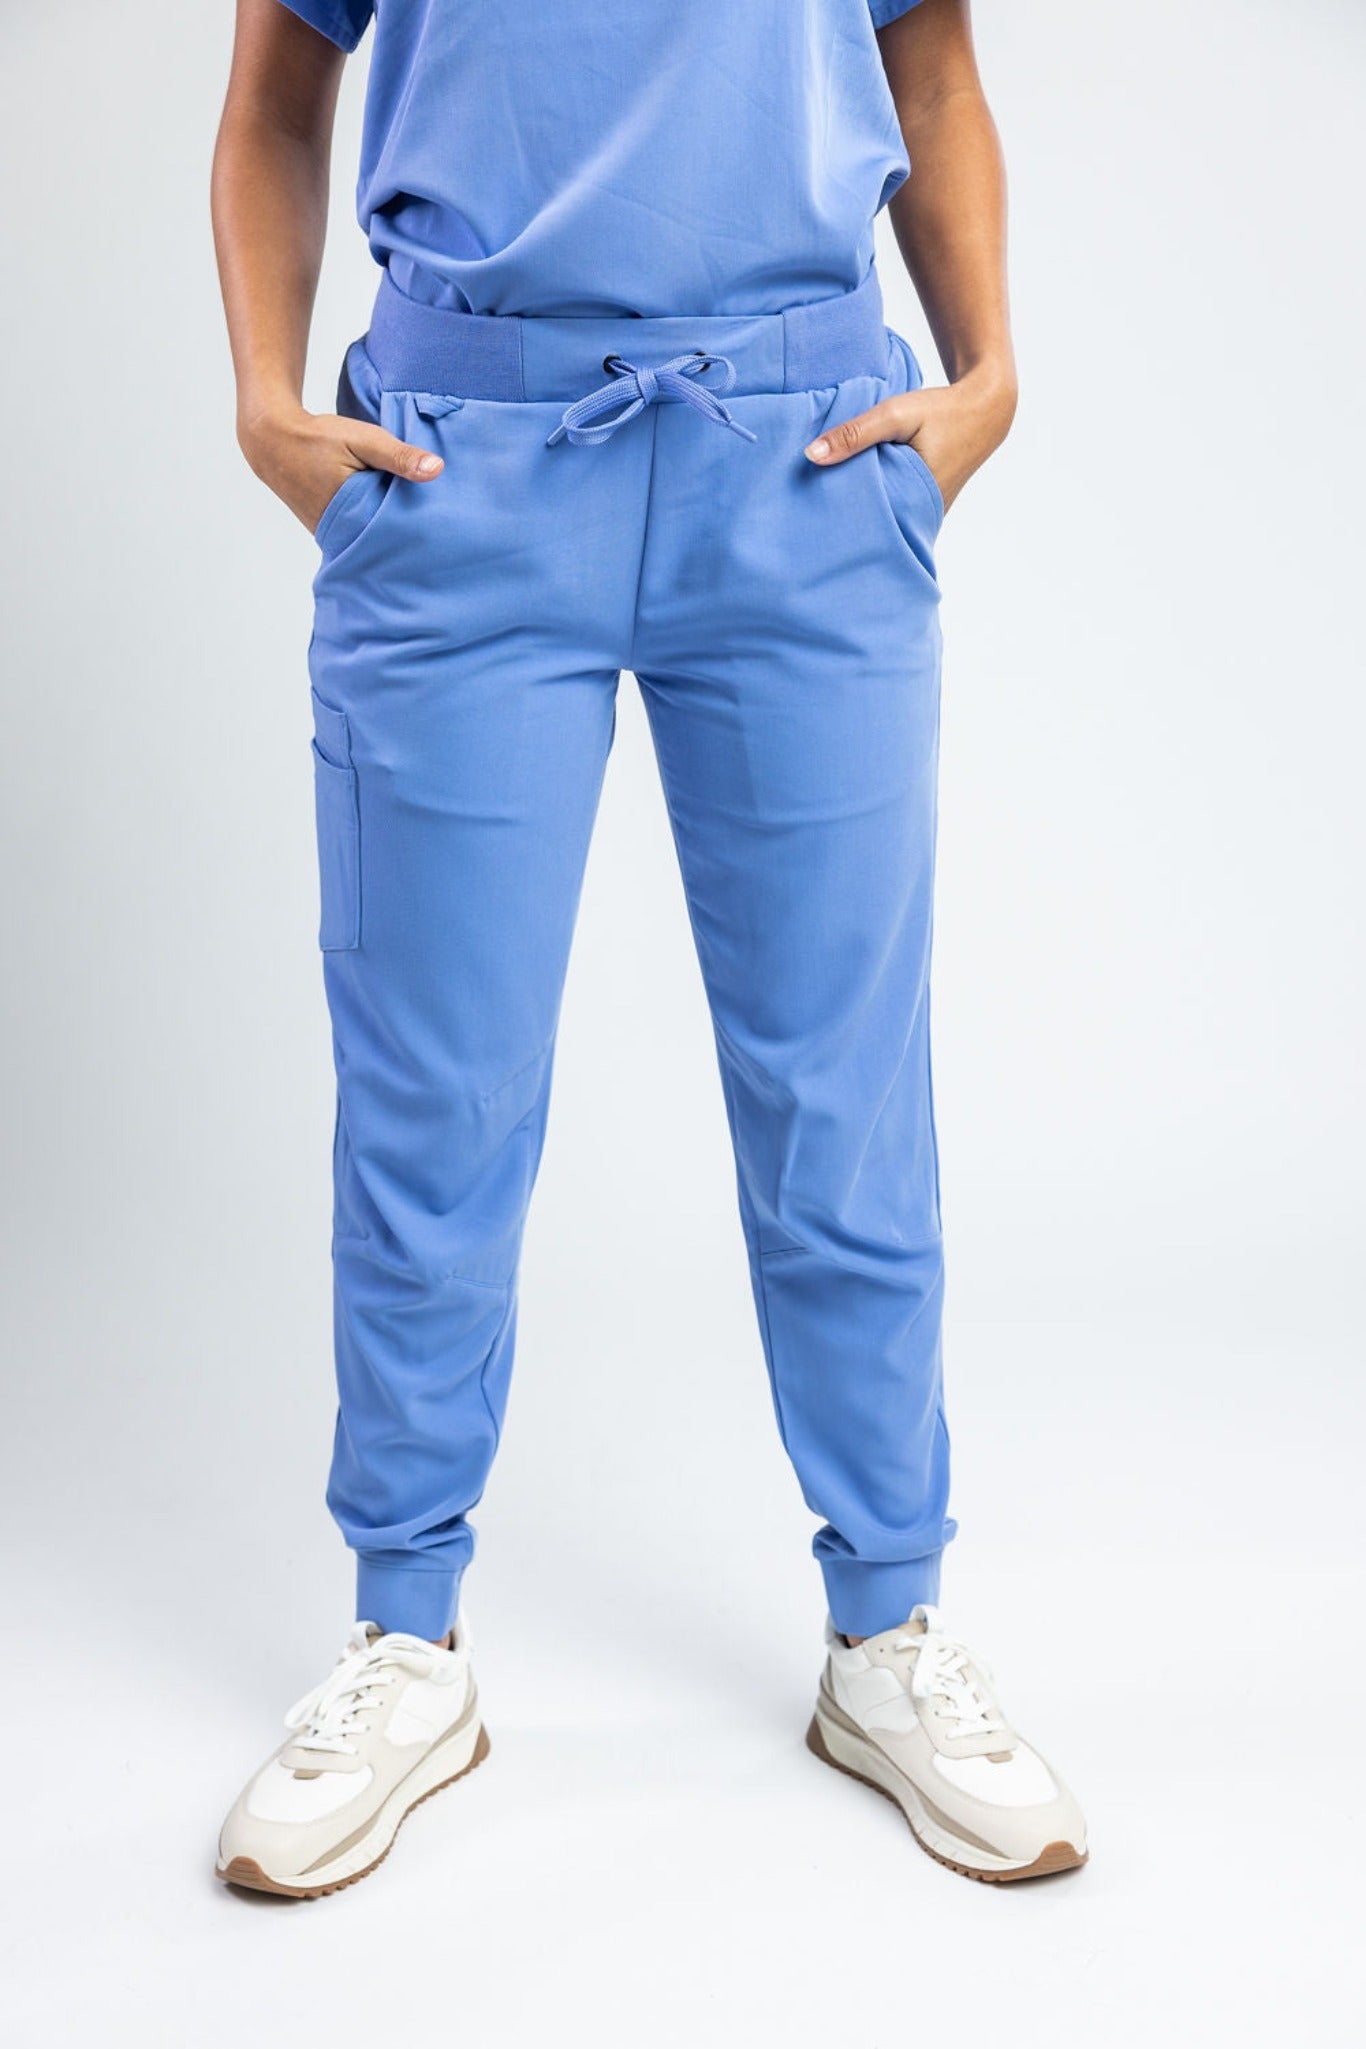 Apollo Scrubs - His - Essential Pant for men, antimicrobial, jogger st